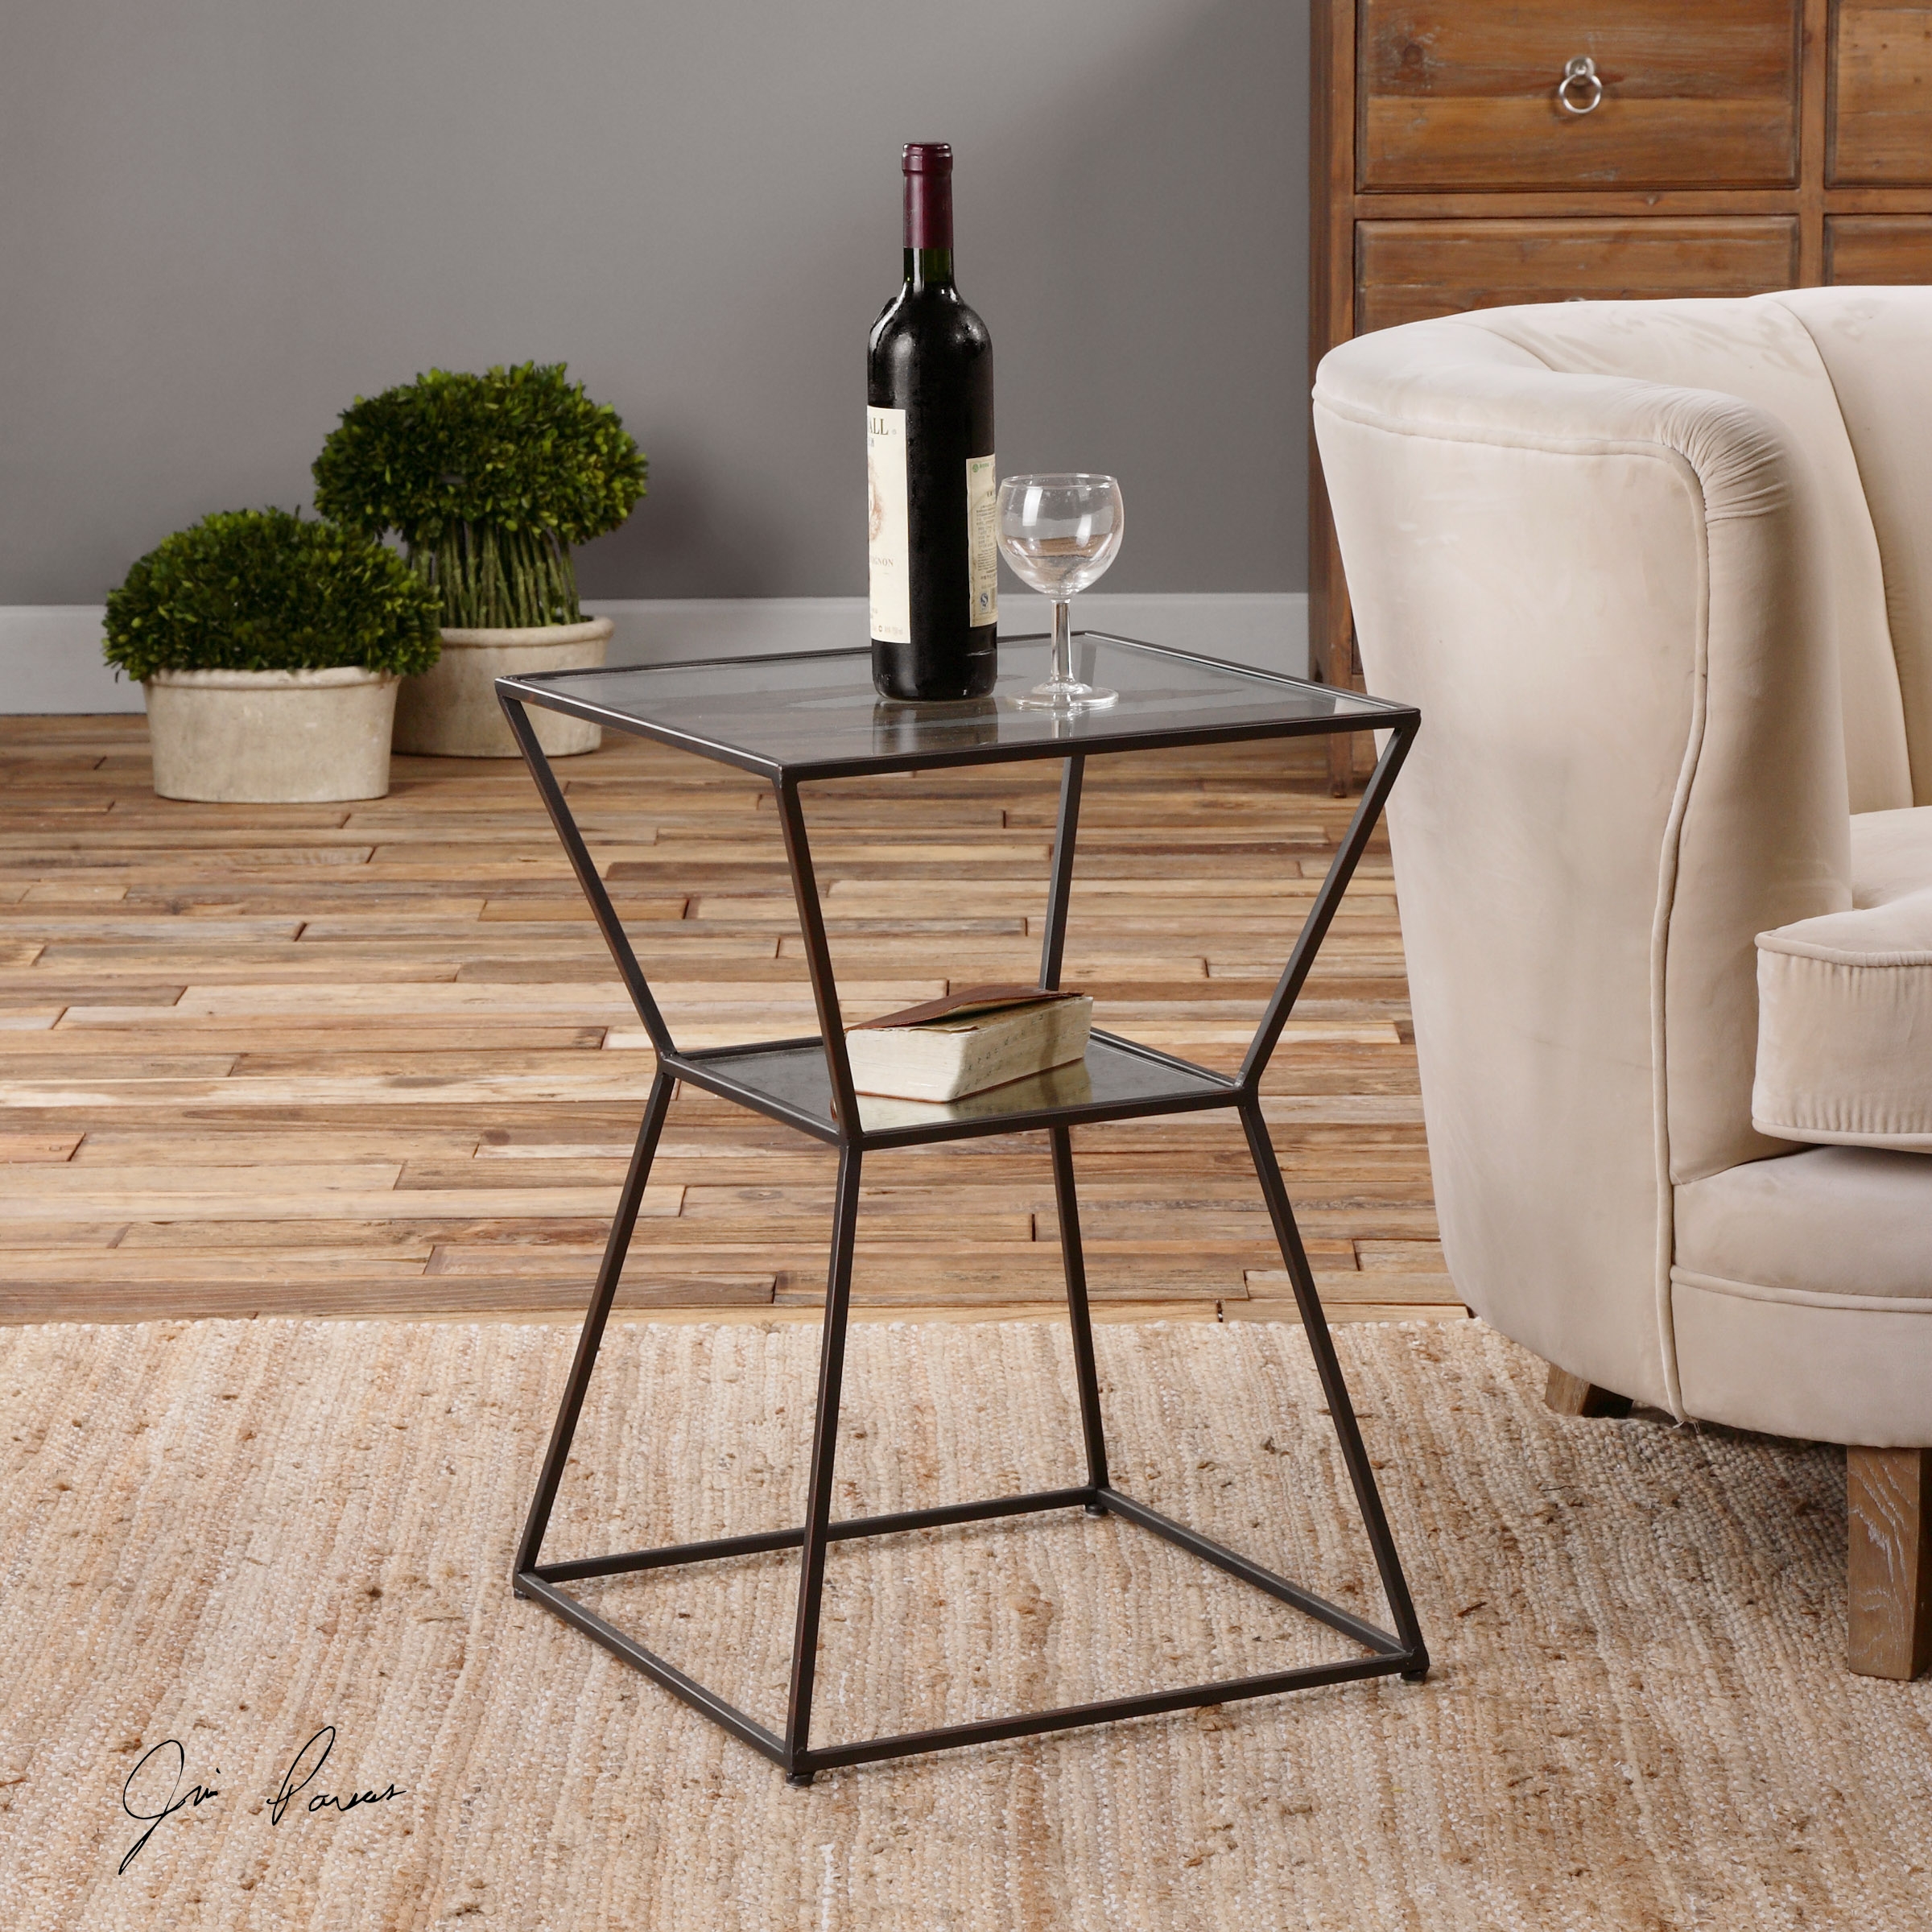 Auryon Iron Accent Table - Image 1